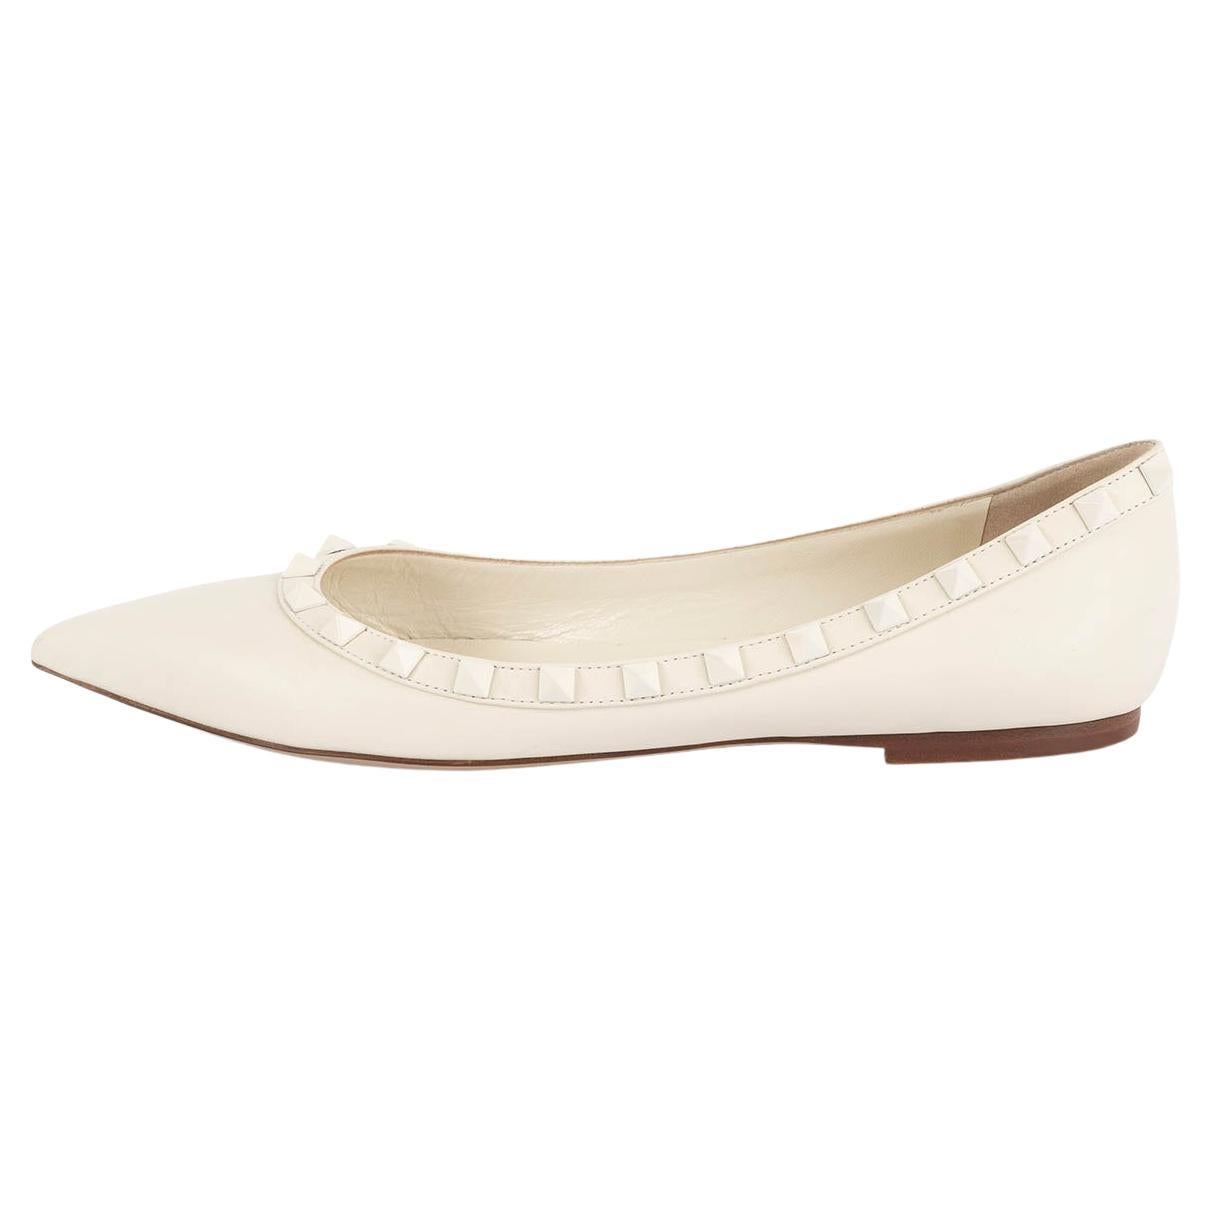 VALENTINO ivory leather ROCKSTUD Pointed Toe Ballet Flats Shoes 39 For Sale